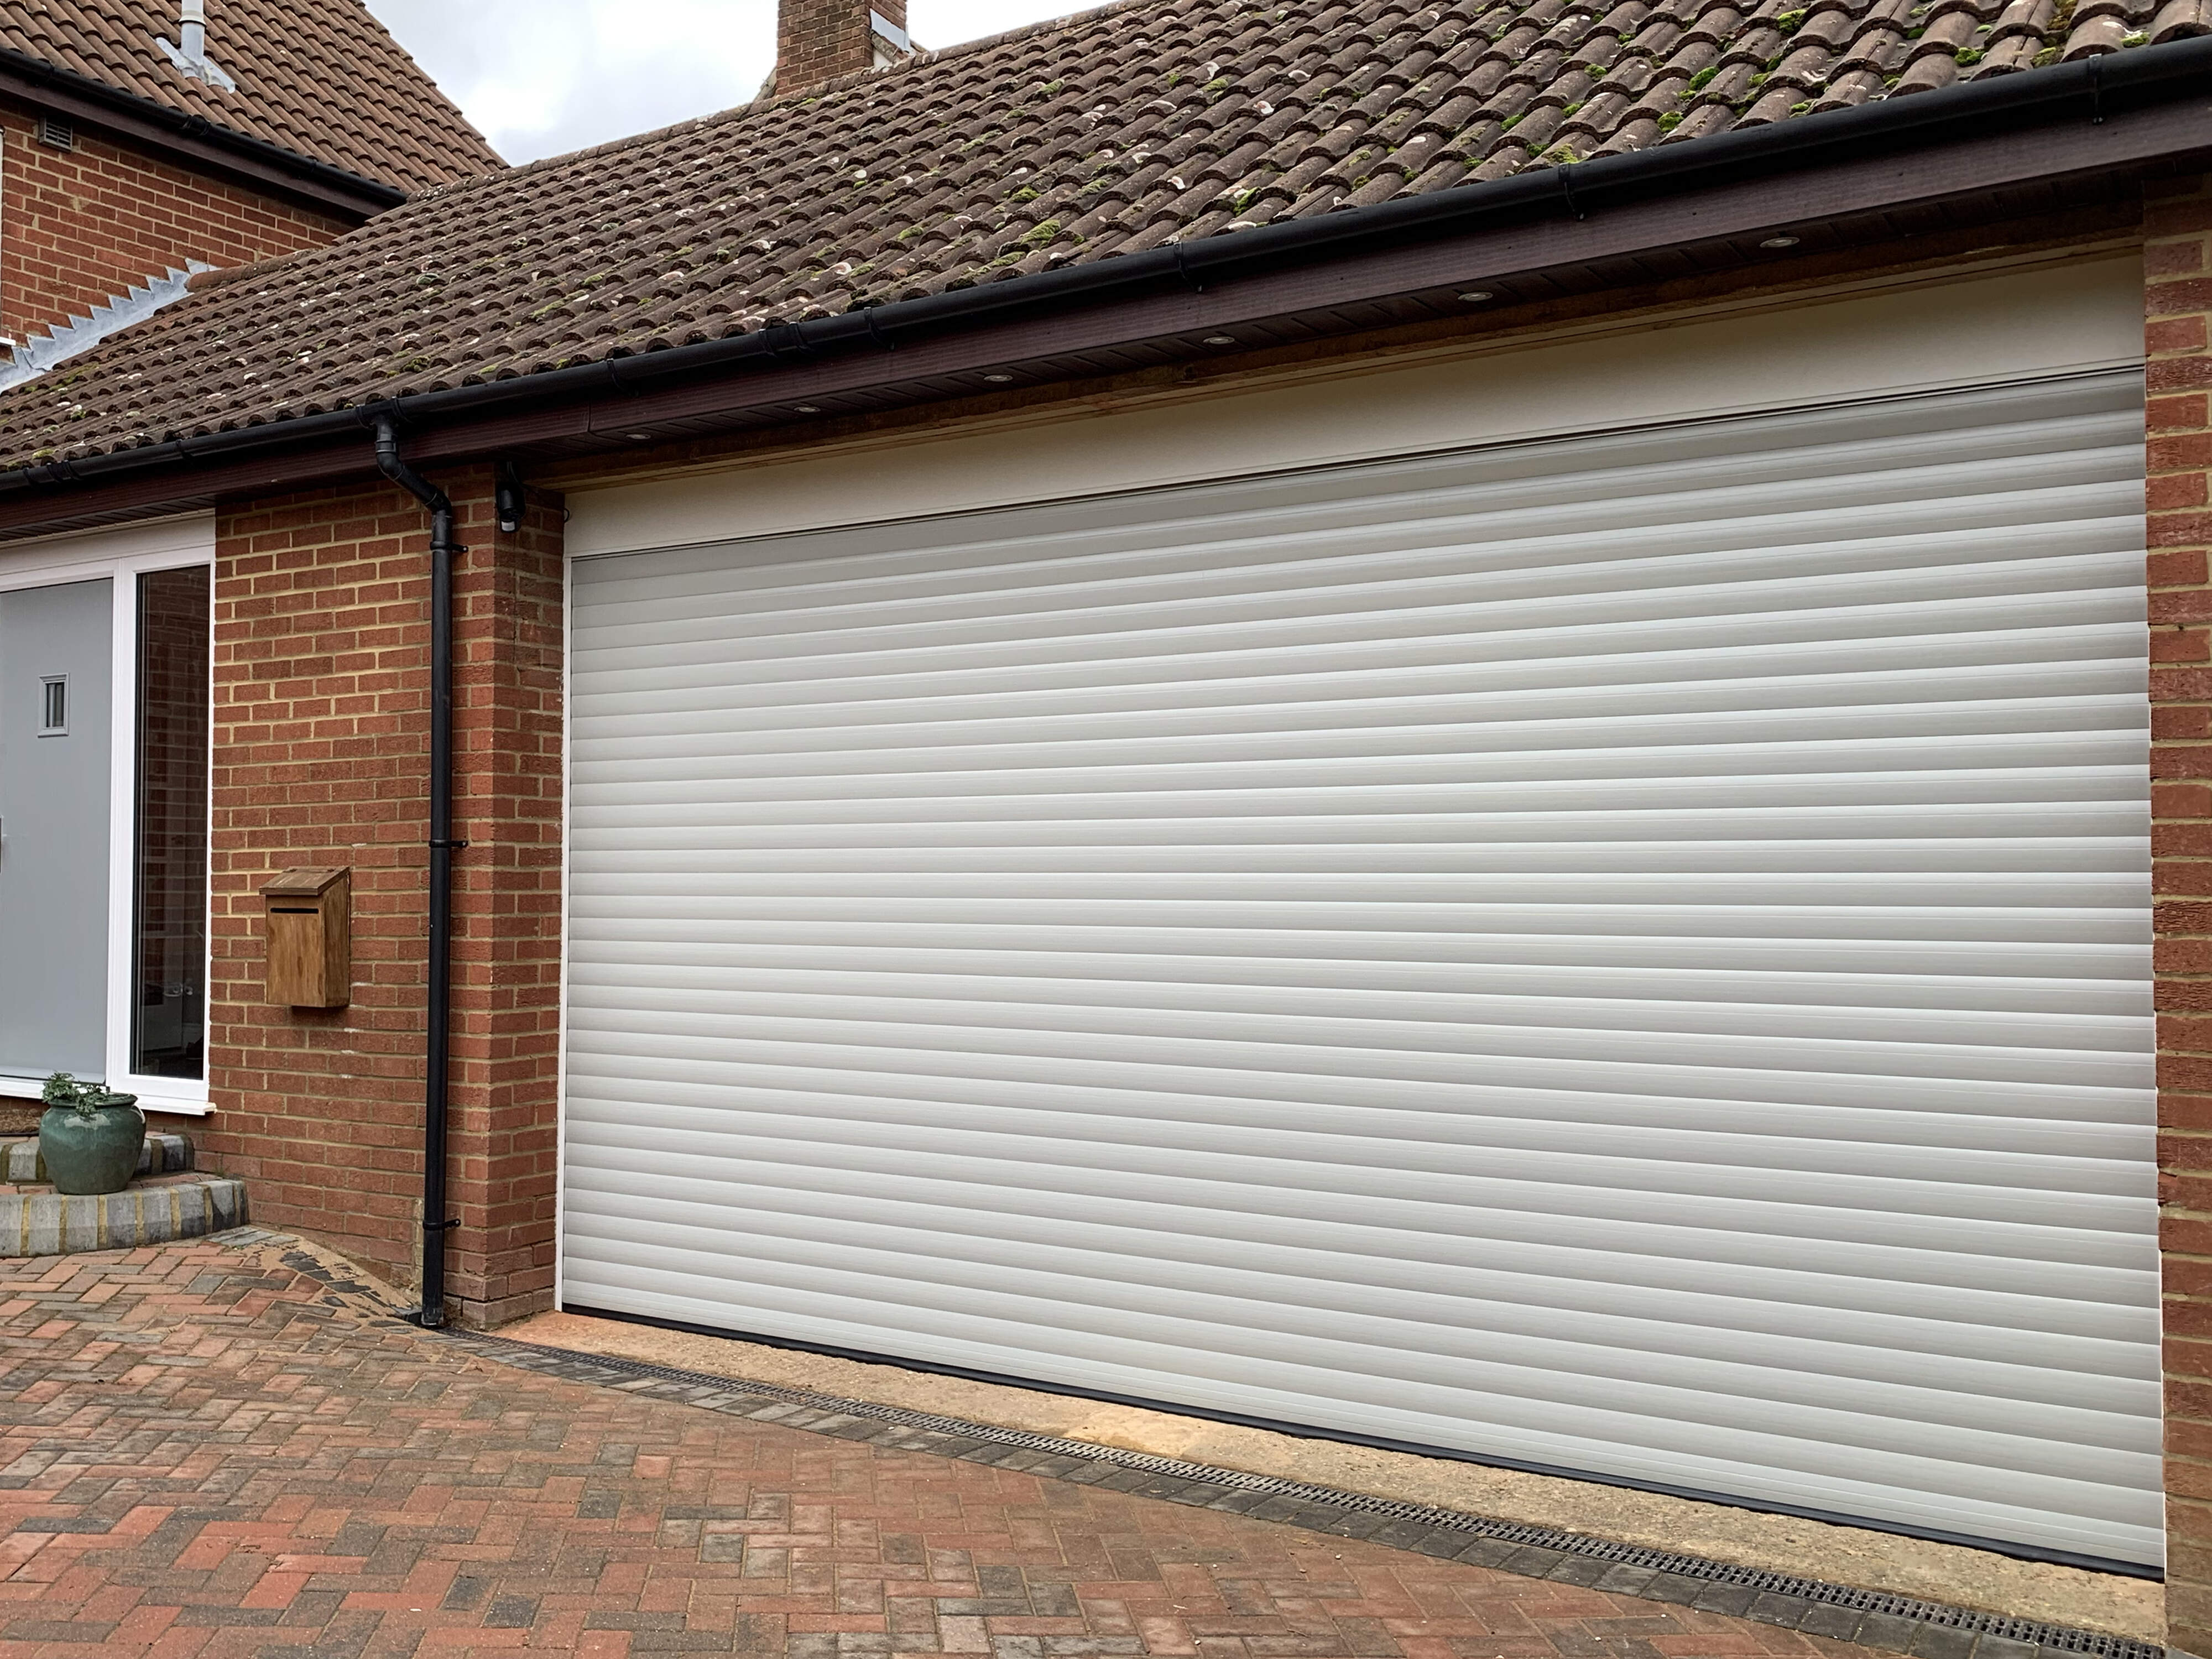 Double Insulated 77mm Lath (Agate Grey) Roller Shutter Garage Door with White Frame.